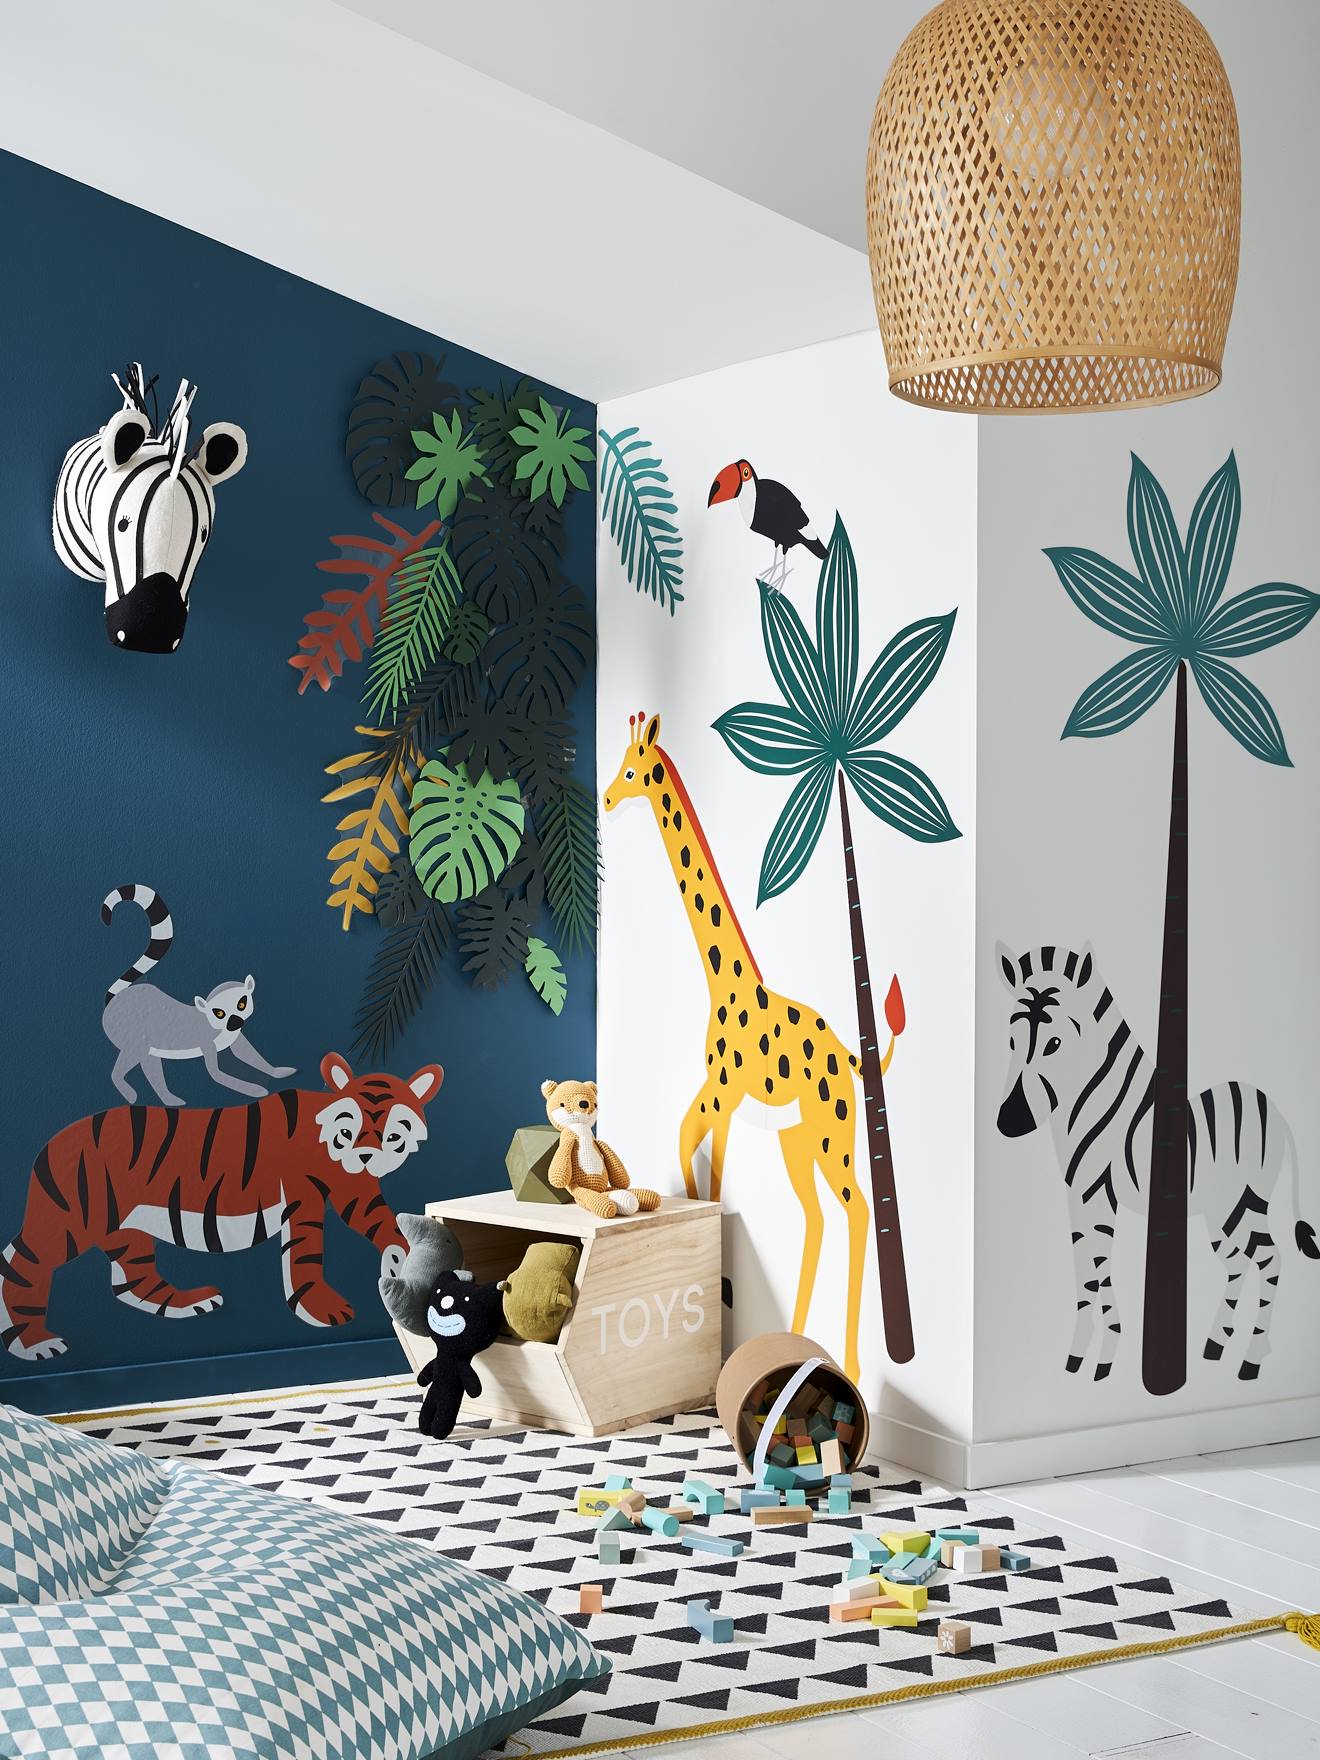 Autocollant mural Animaux jungle KIT COMPLET